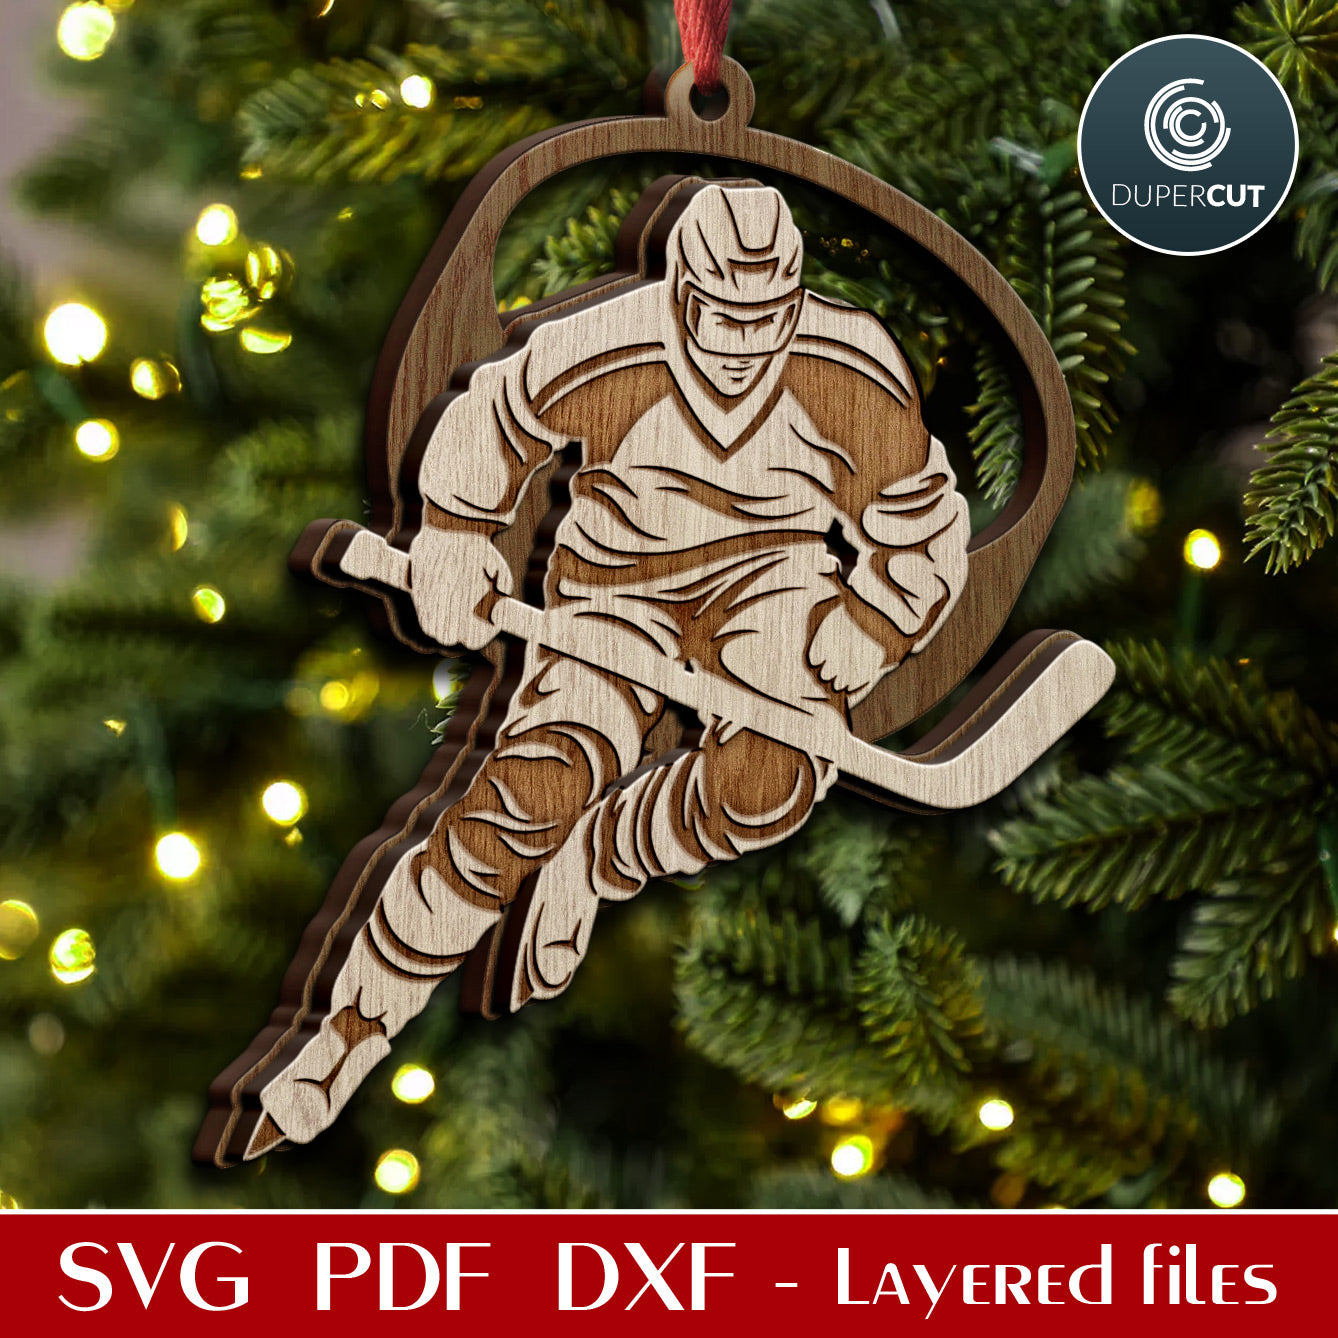 Sports holiday Hockey player ornament, SVG layered vector cut file for laser engraving Glowforge, X-tool, Cricut, CNC plasma machines by www.DuperCut.com